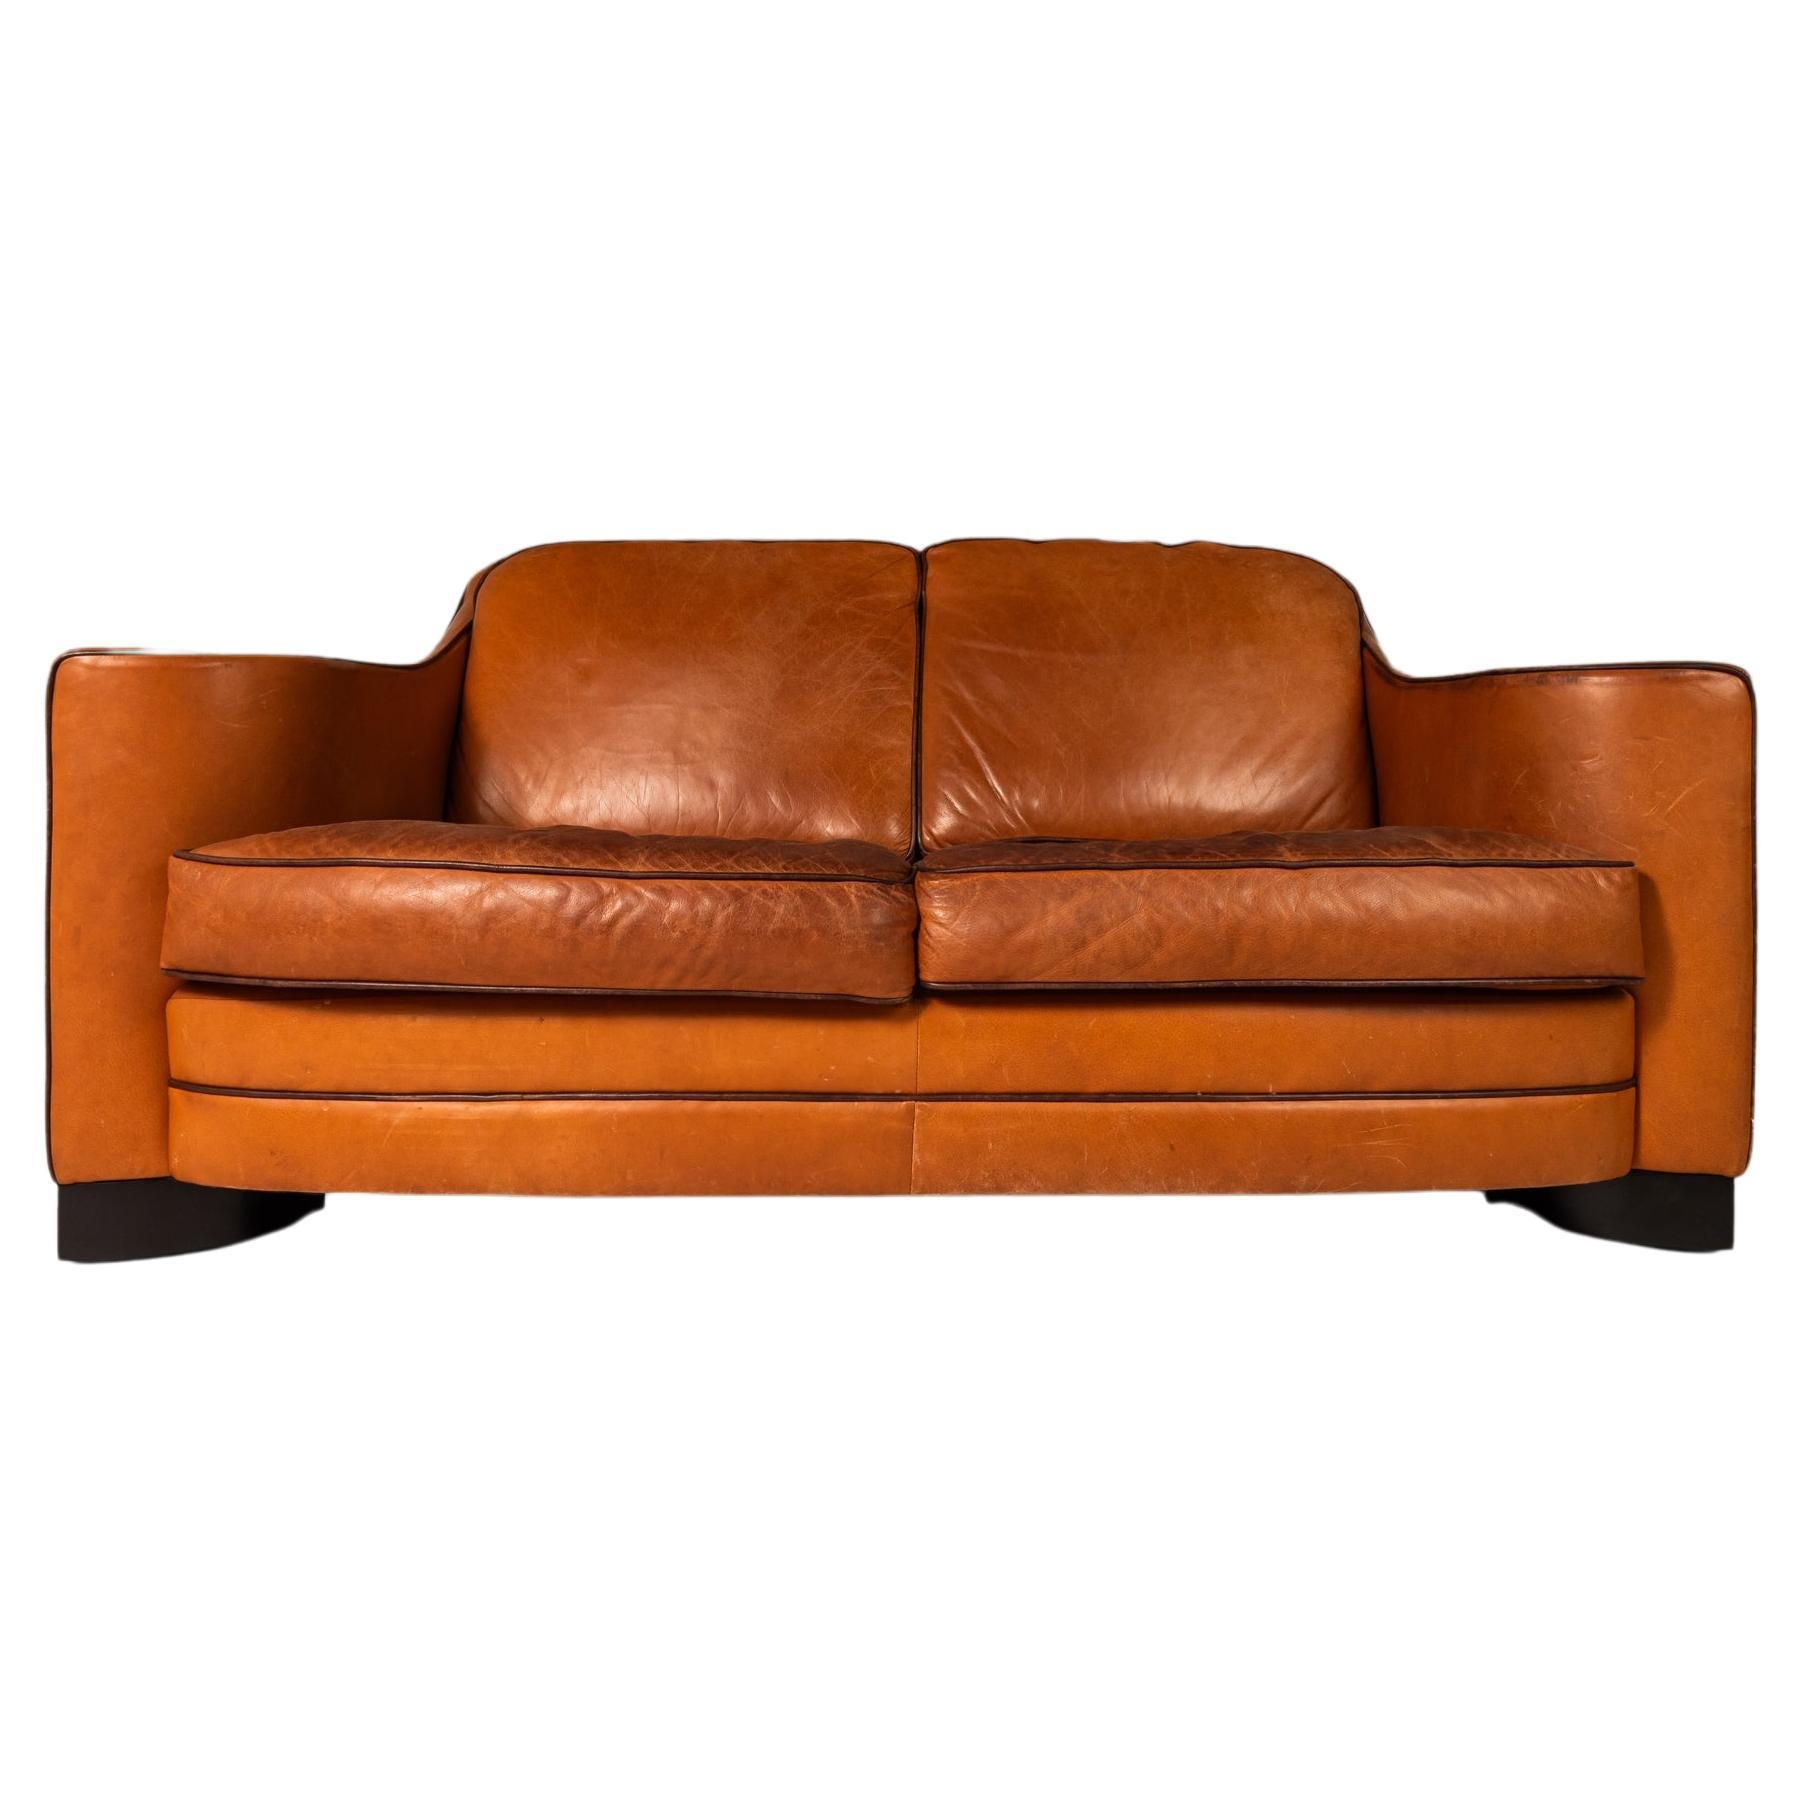 Art Deco Loveseat Sofa with Sculptural Arms in Patinaed Leather, USA, c. 1970s